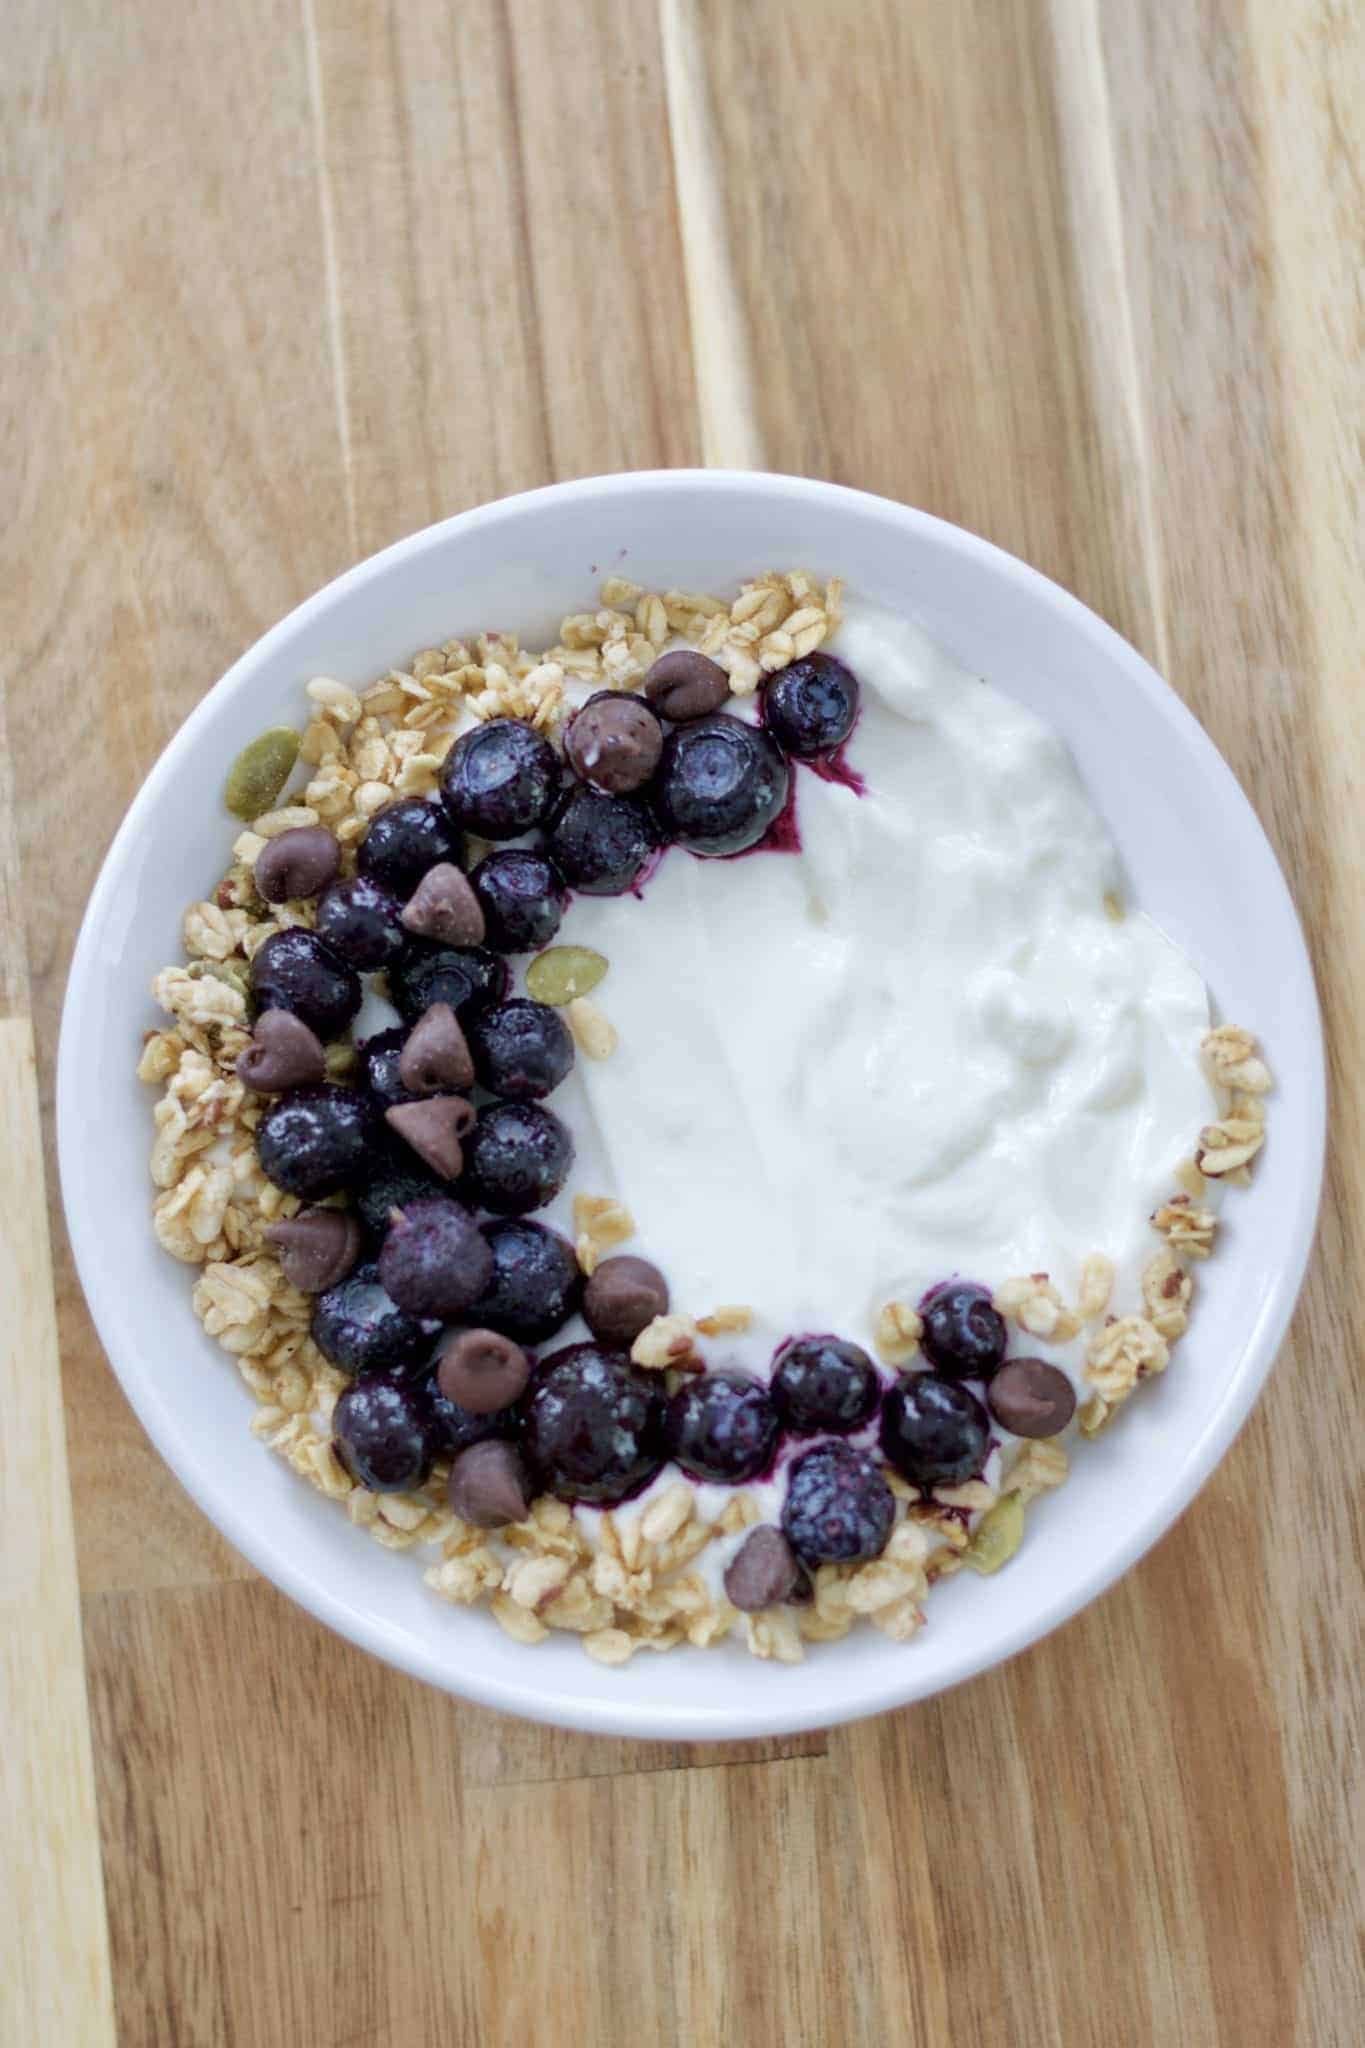 Simple Instant Pot 3 ingredient yogurt with blueberries, granola, and chocolate chips